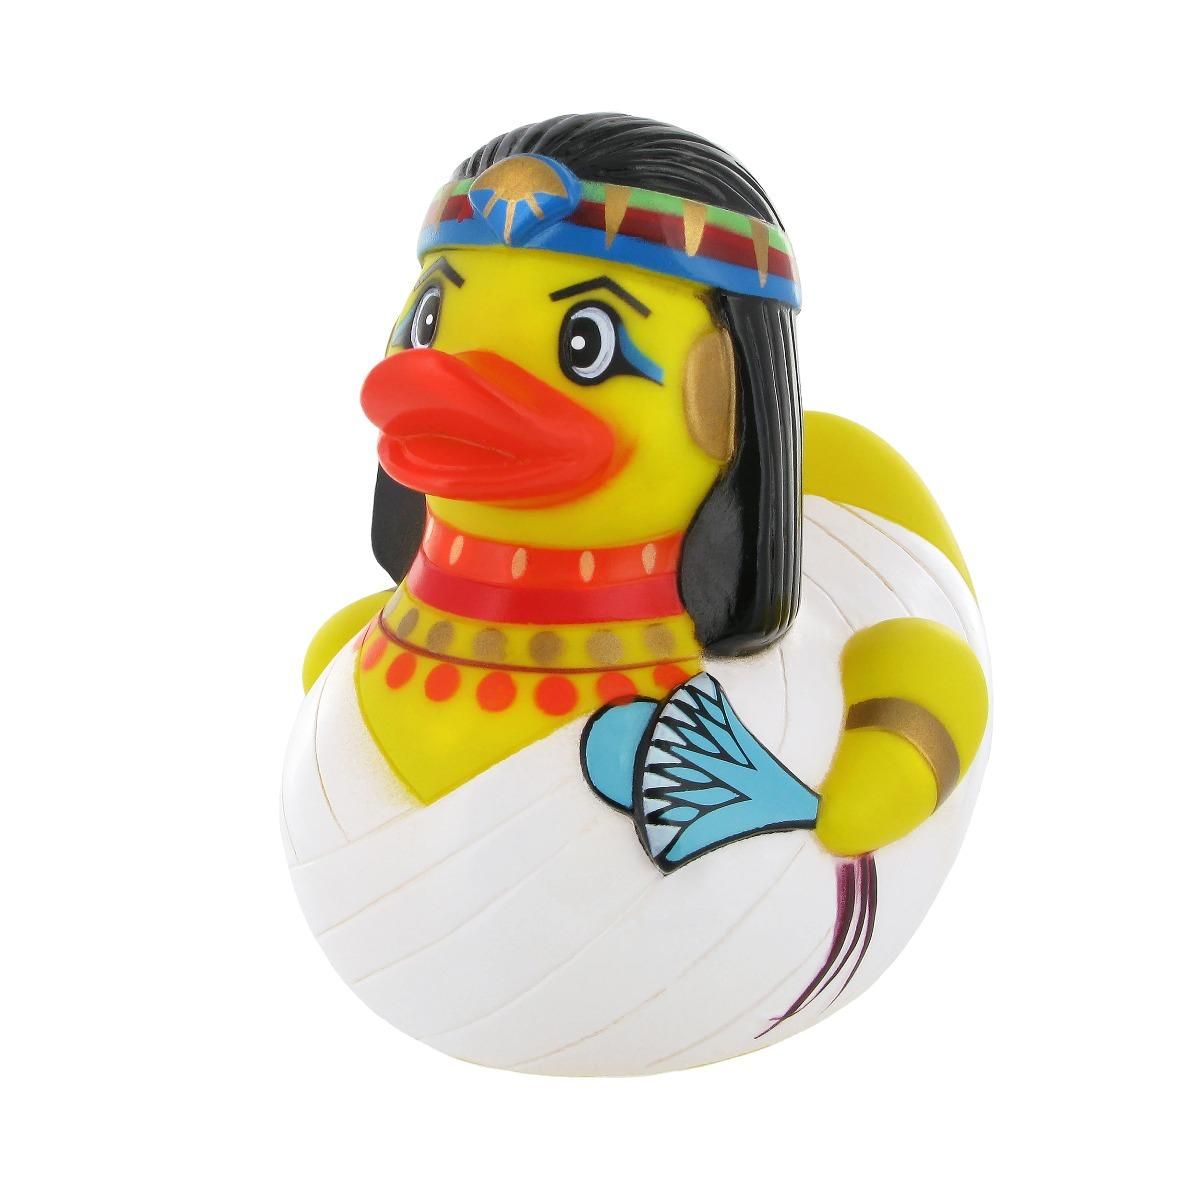 Rubber duck that looks like Cleopatra